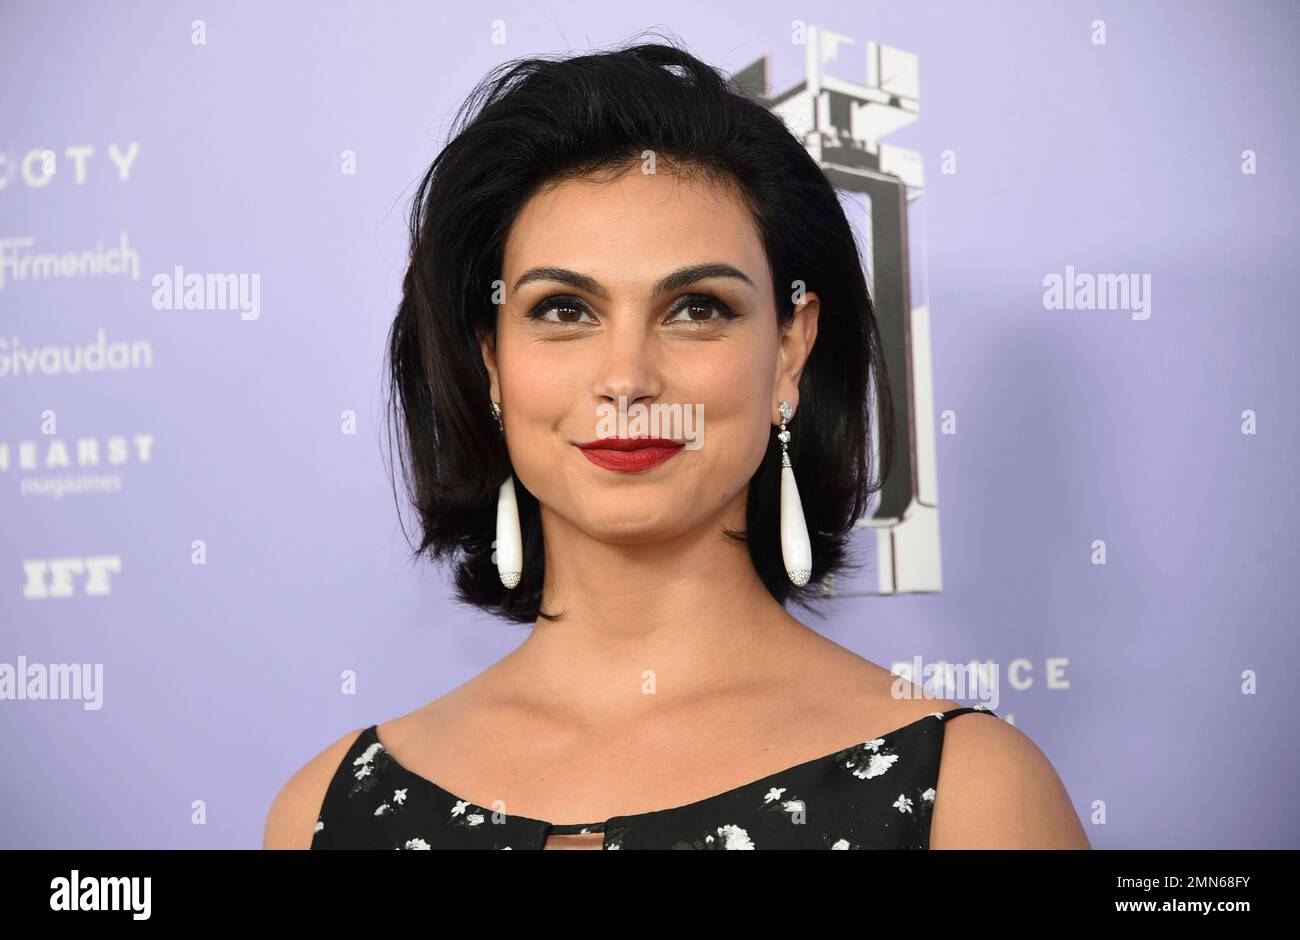 Actress Morena Baccarin Attends The Fragrance Foundation Awards At Alice Tully Hall On Tuesday 7319